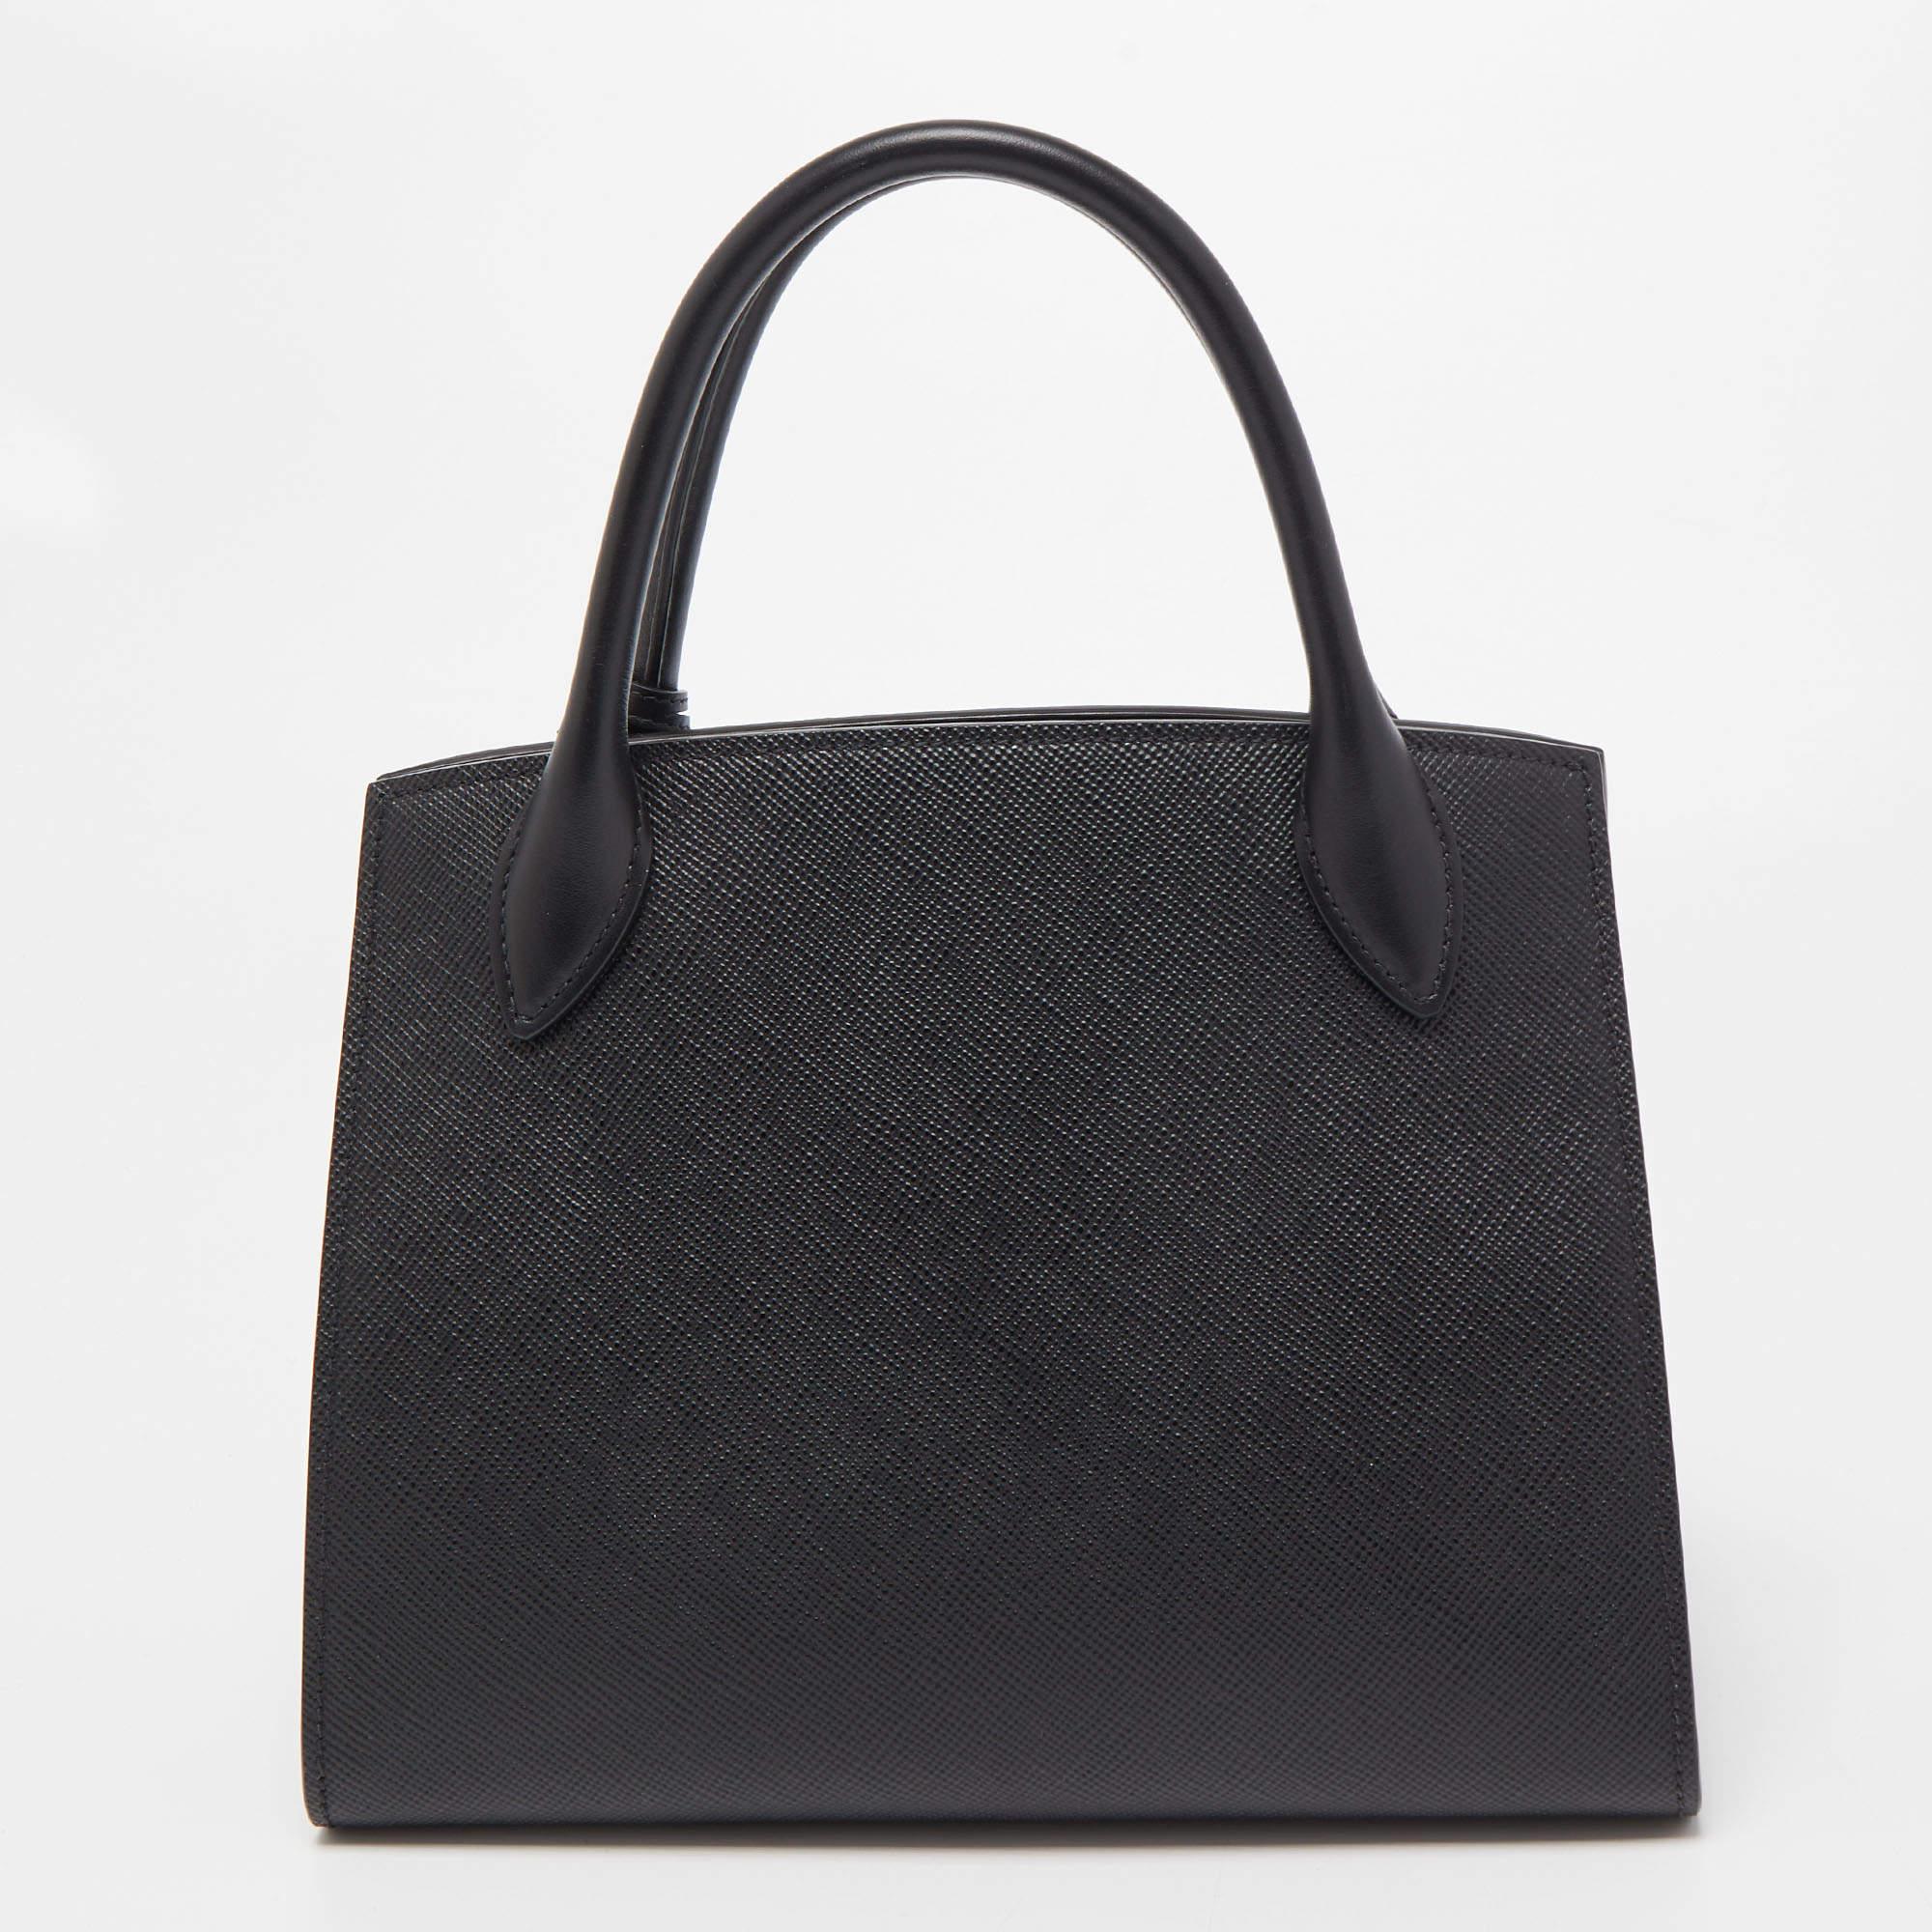 A classic handbag comes with the promise of enduring appeal, boosting your style time and again. This Prada Monochrome bag is one such creation. It’s a fine purchase.

Includes: Original Dustbag, Info Booklet, Authenticity Card, Detachable Strap